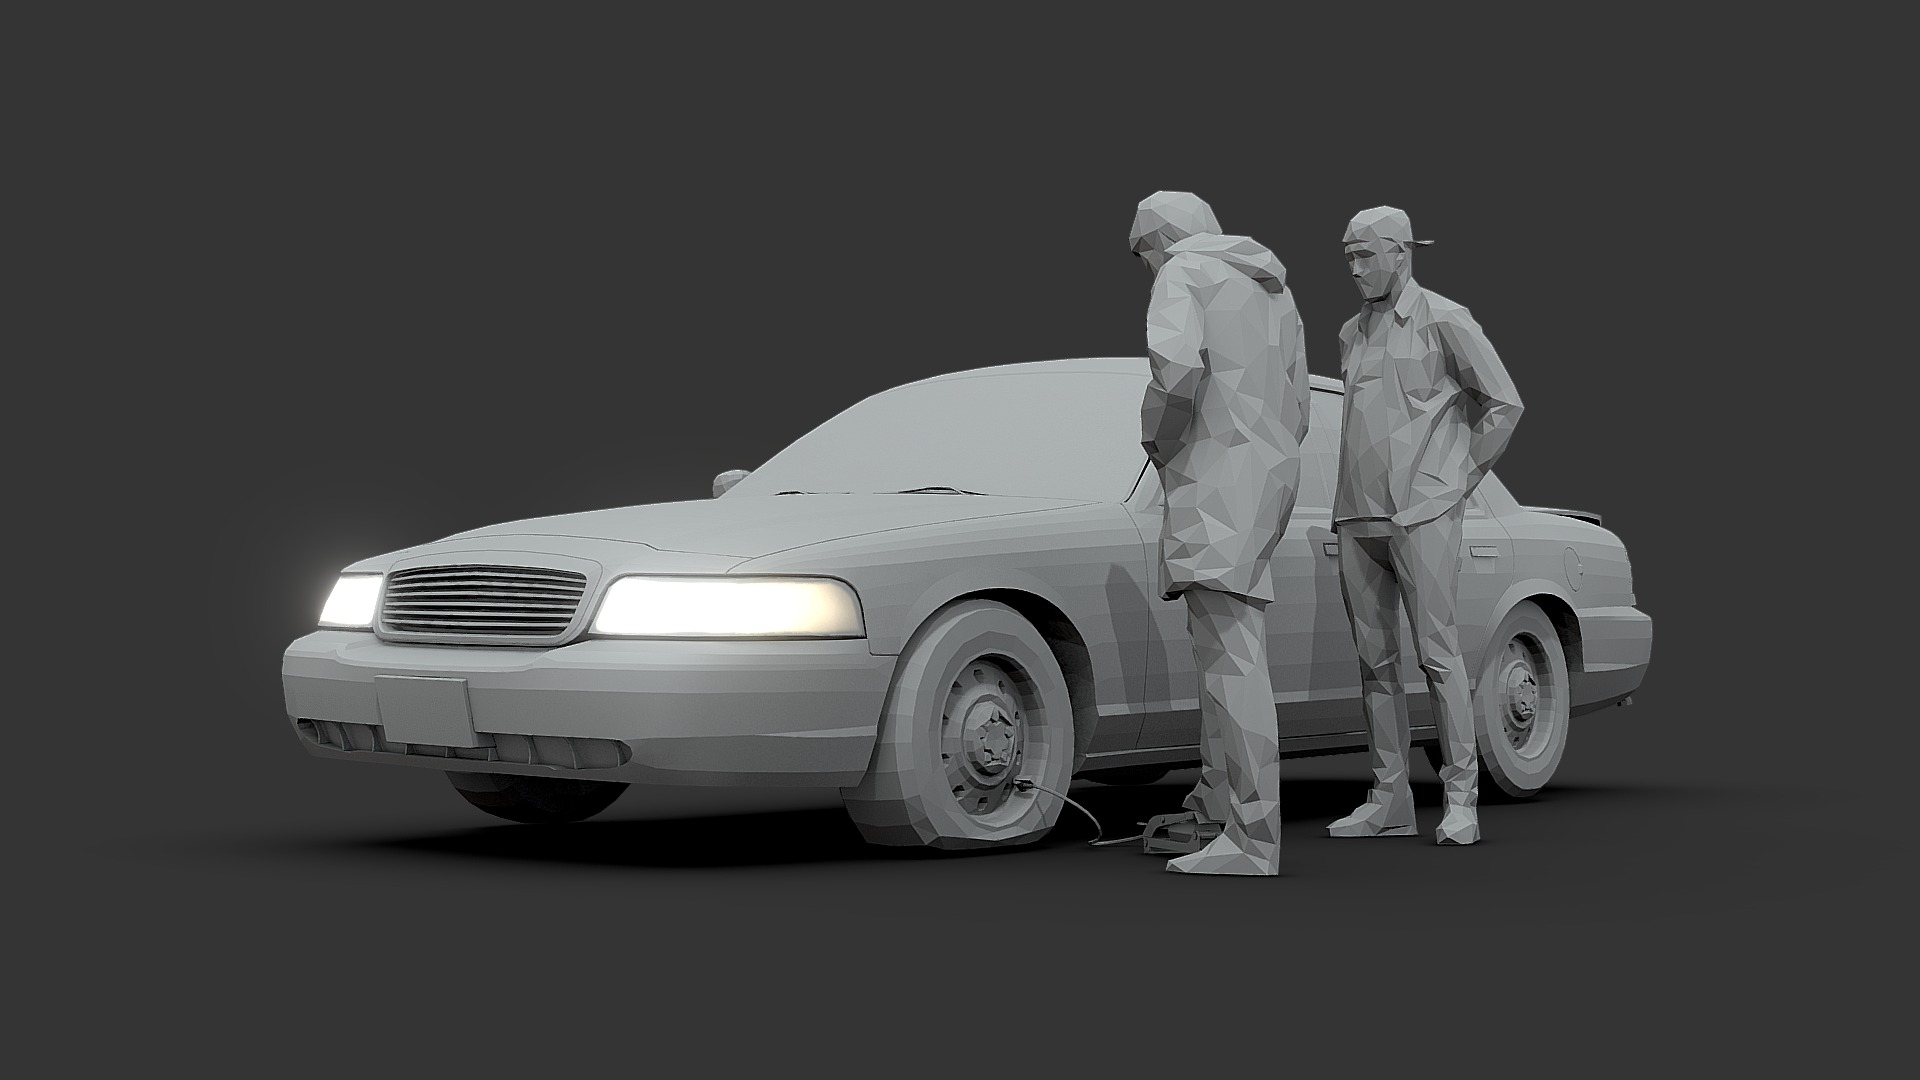 3D model Road Accident - This is a 3D model of the Road Accident. The 3D model is about a couple of men in white suits standing next to a car.